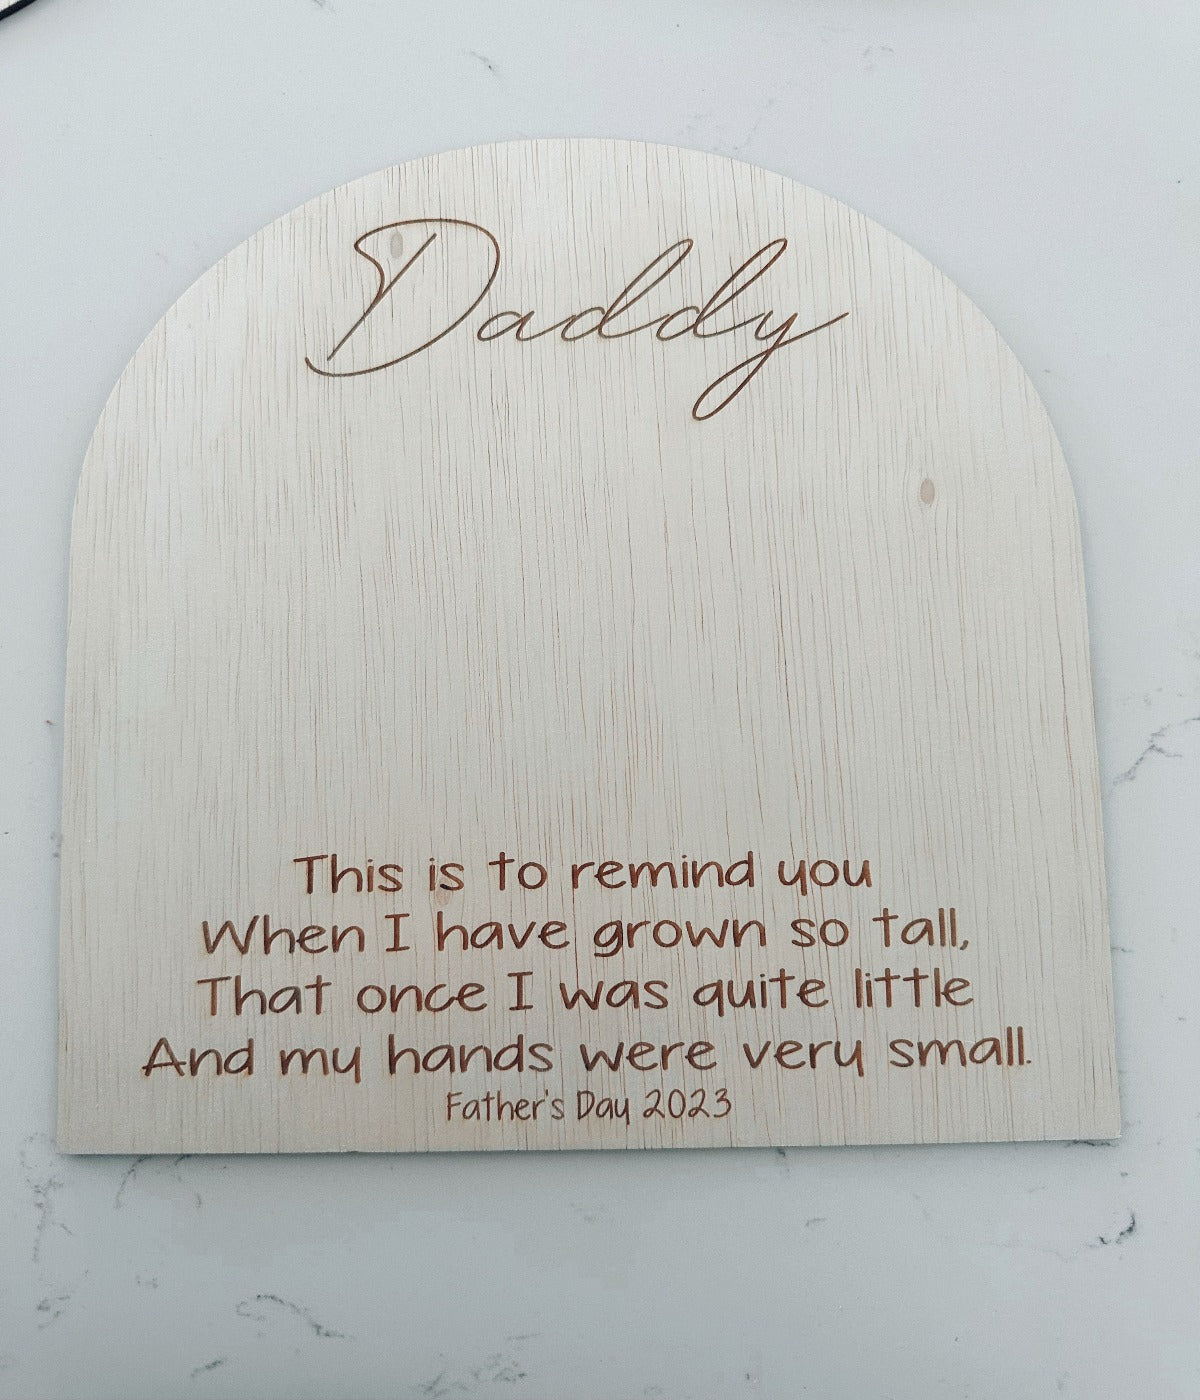 Arched ‘Daddy’s Reminder’ Plaque